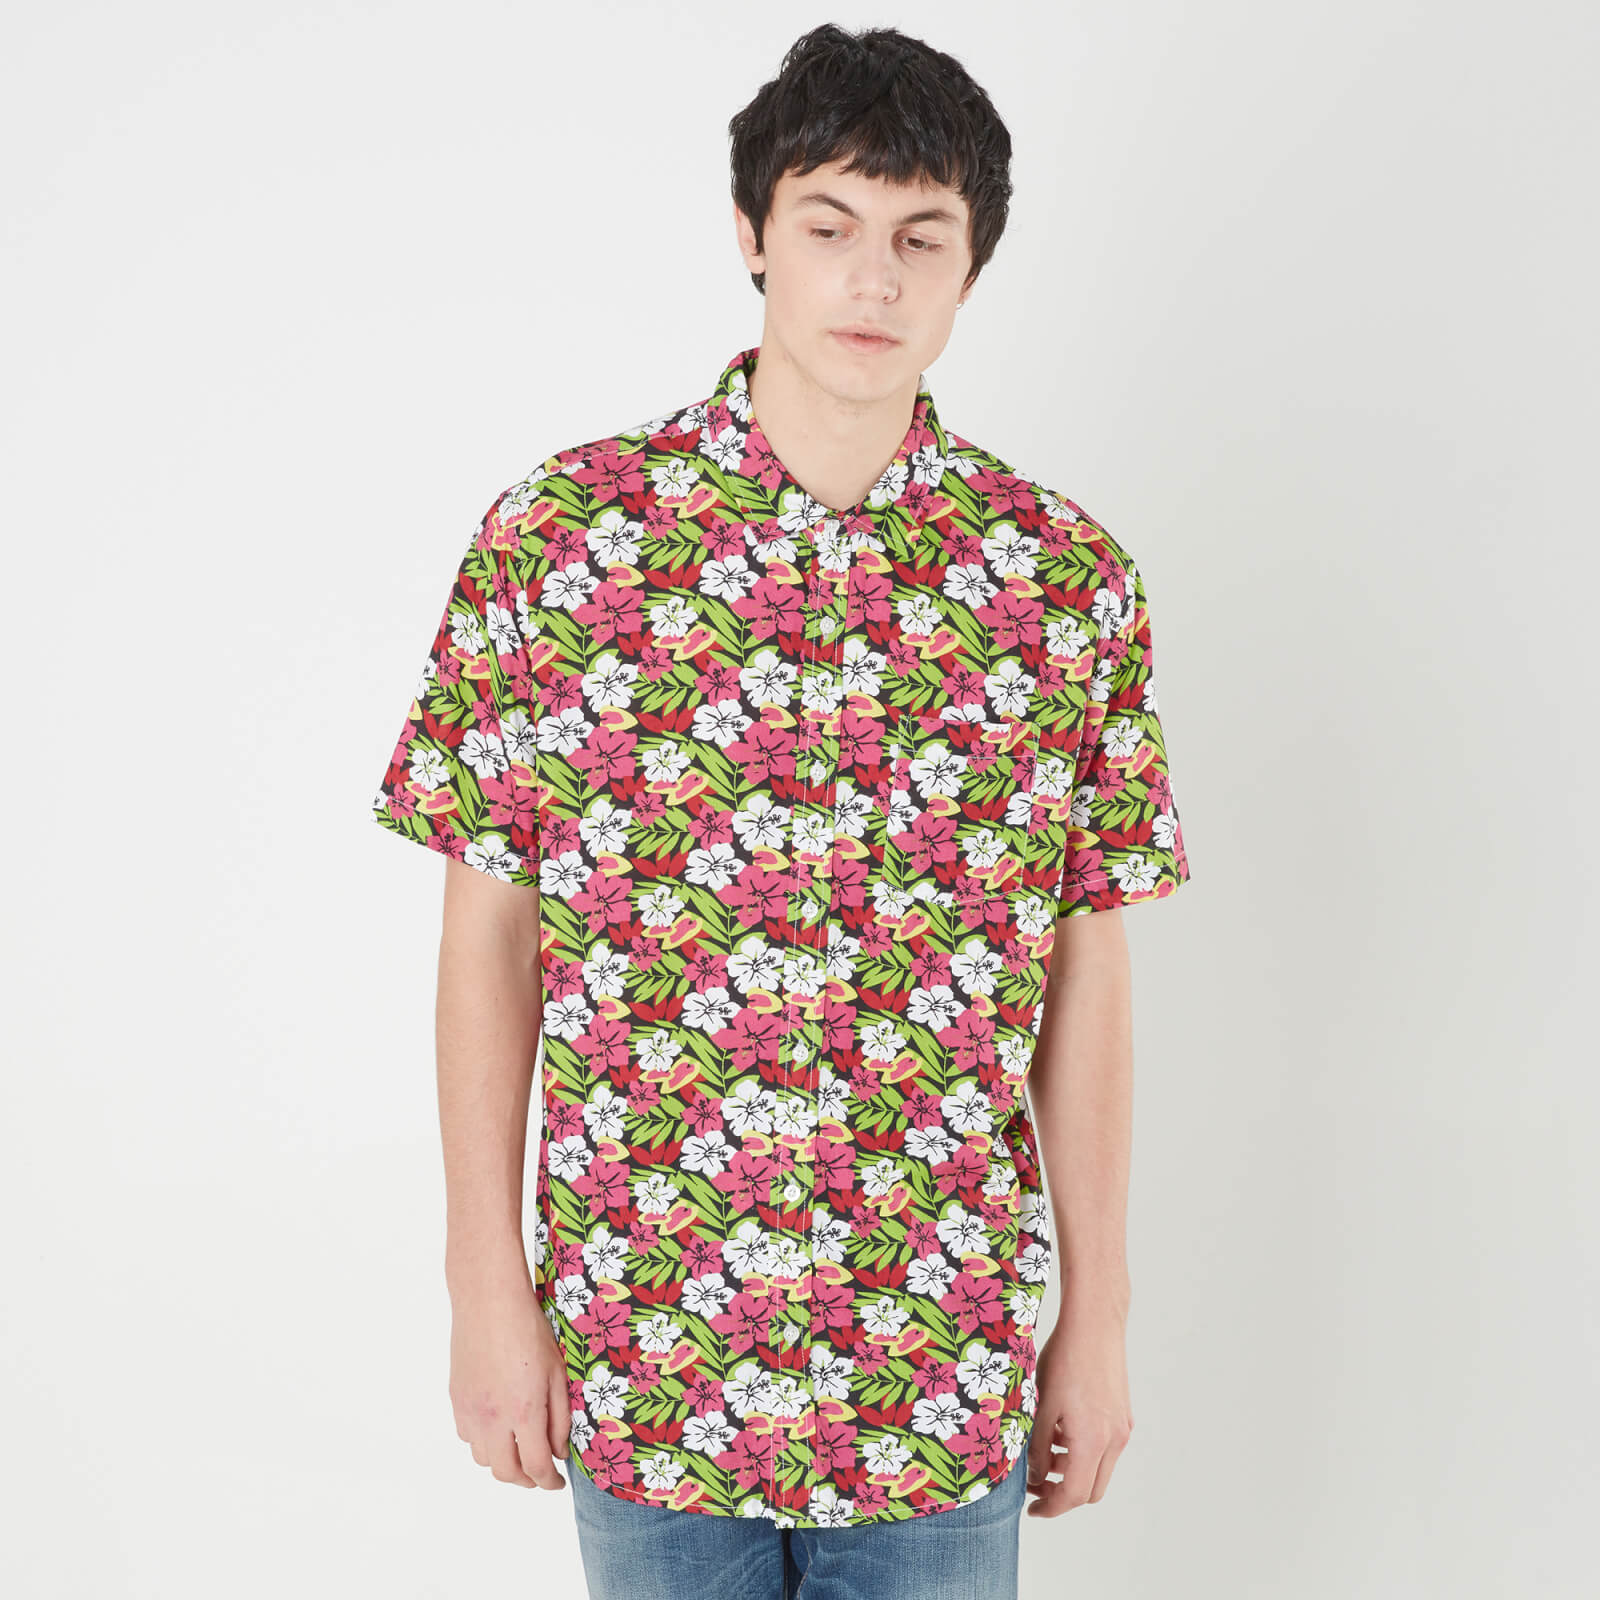 Limited Edition Goonies Printed Shirt - Zavvi Exclusive - S